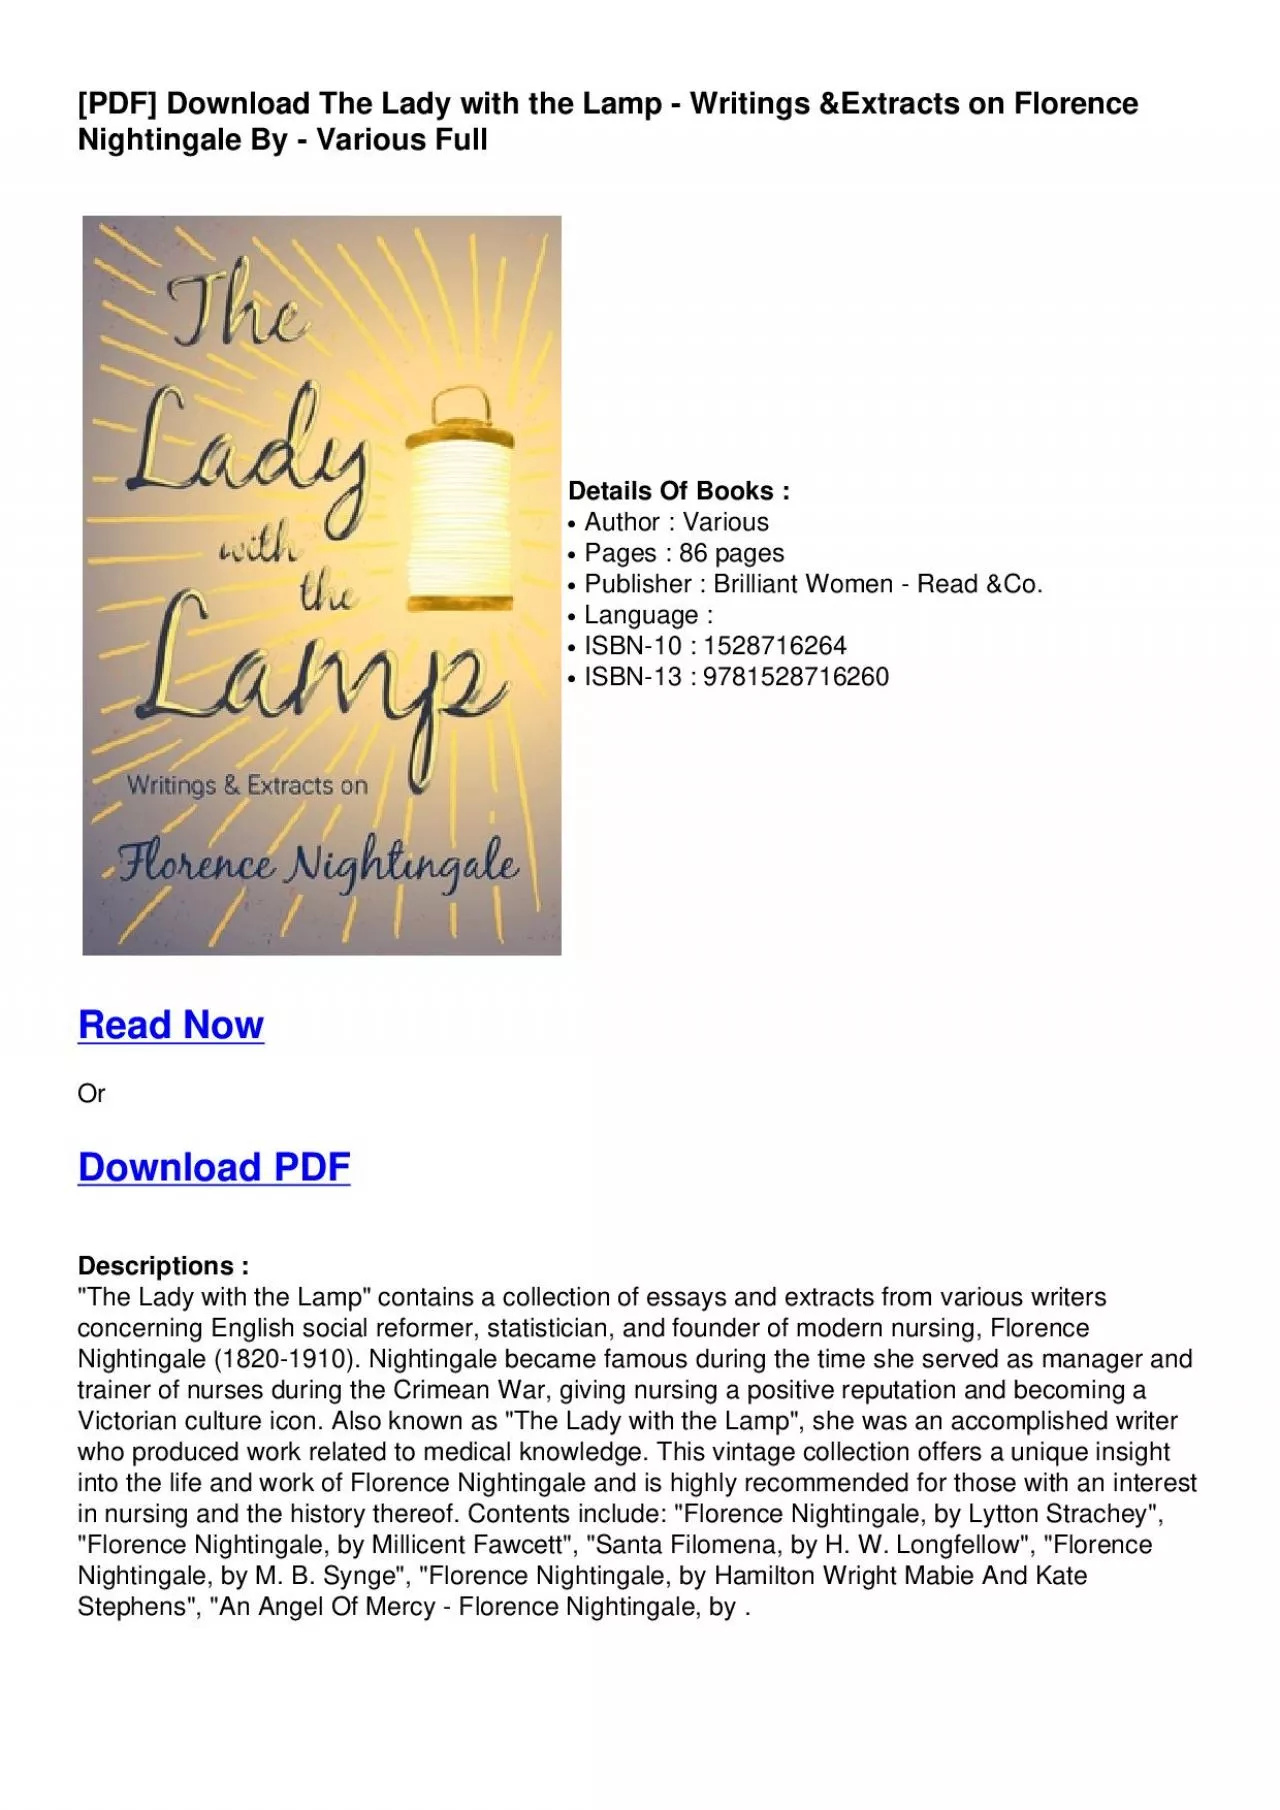 Download [PDF] The Lady with the Lamp - Writings & Extracts on Florence Nightingale